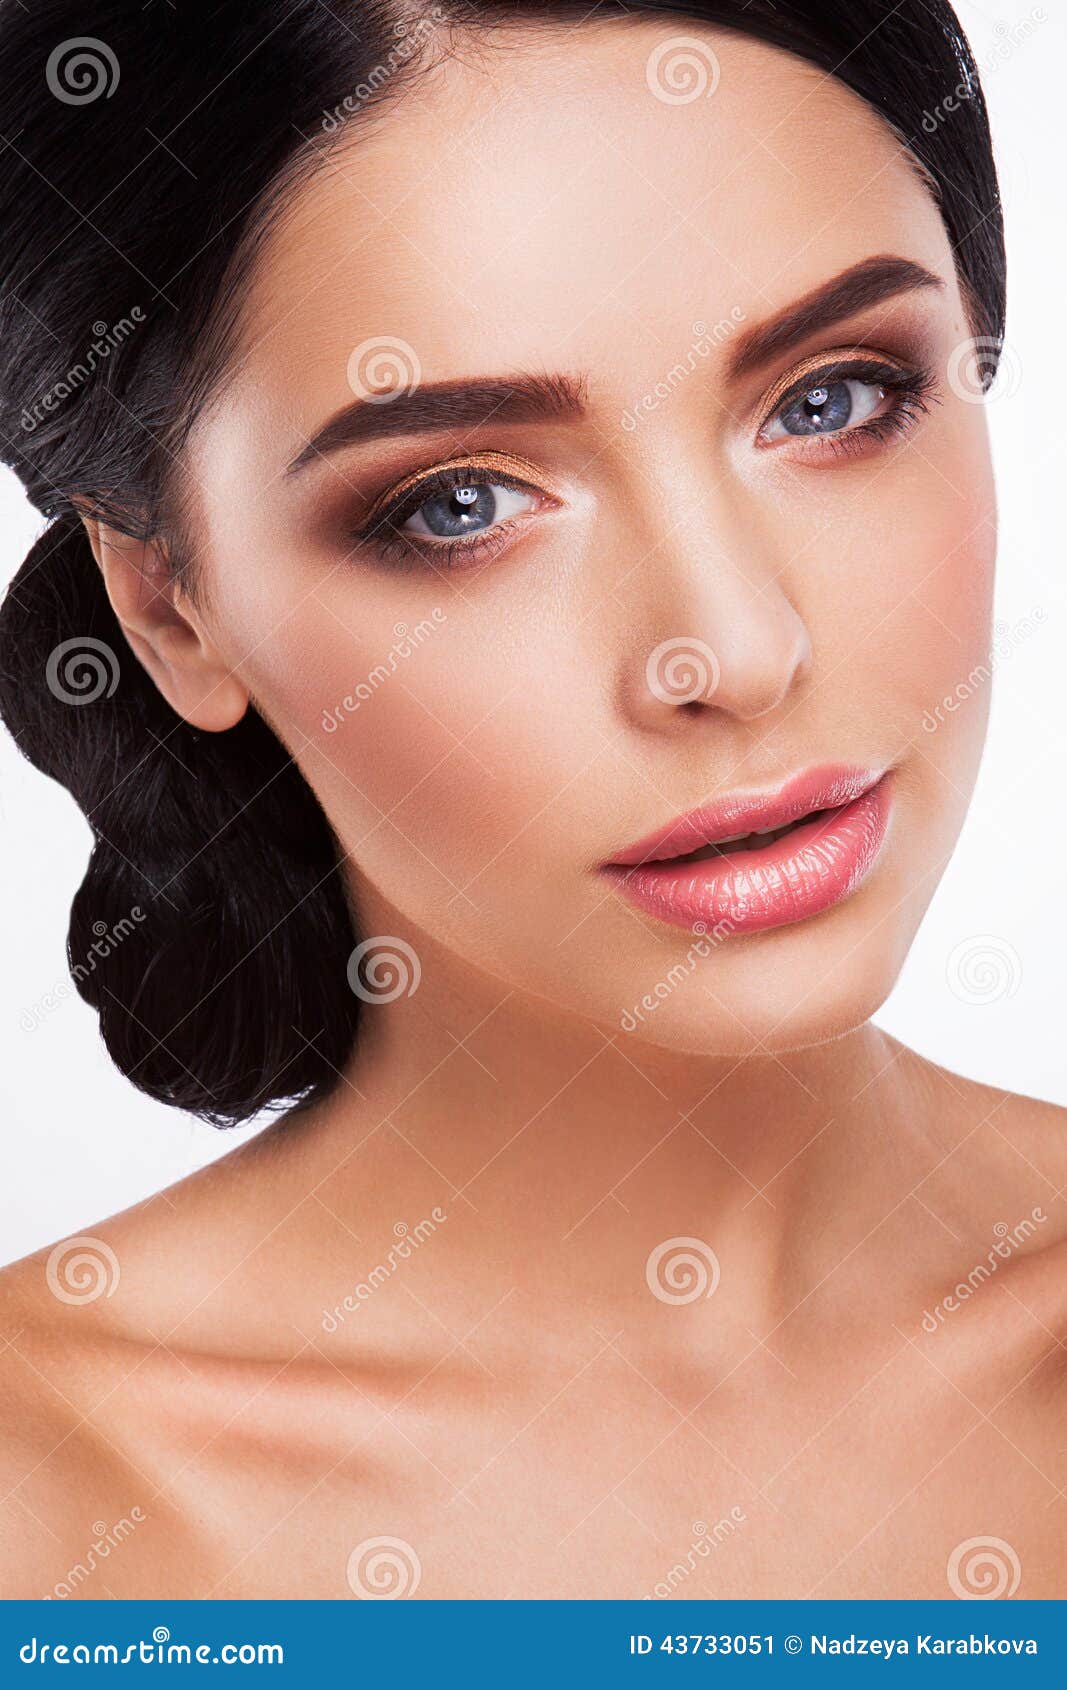 Woman With Beautiful Bright Makeup Stock Image Image Of Girl